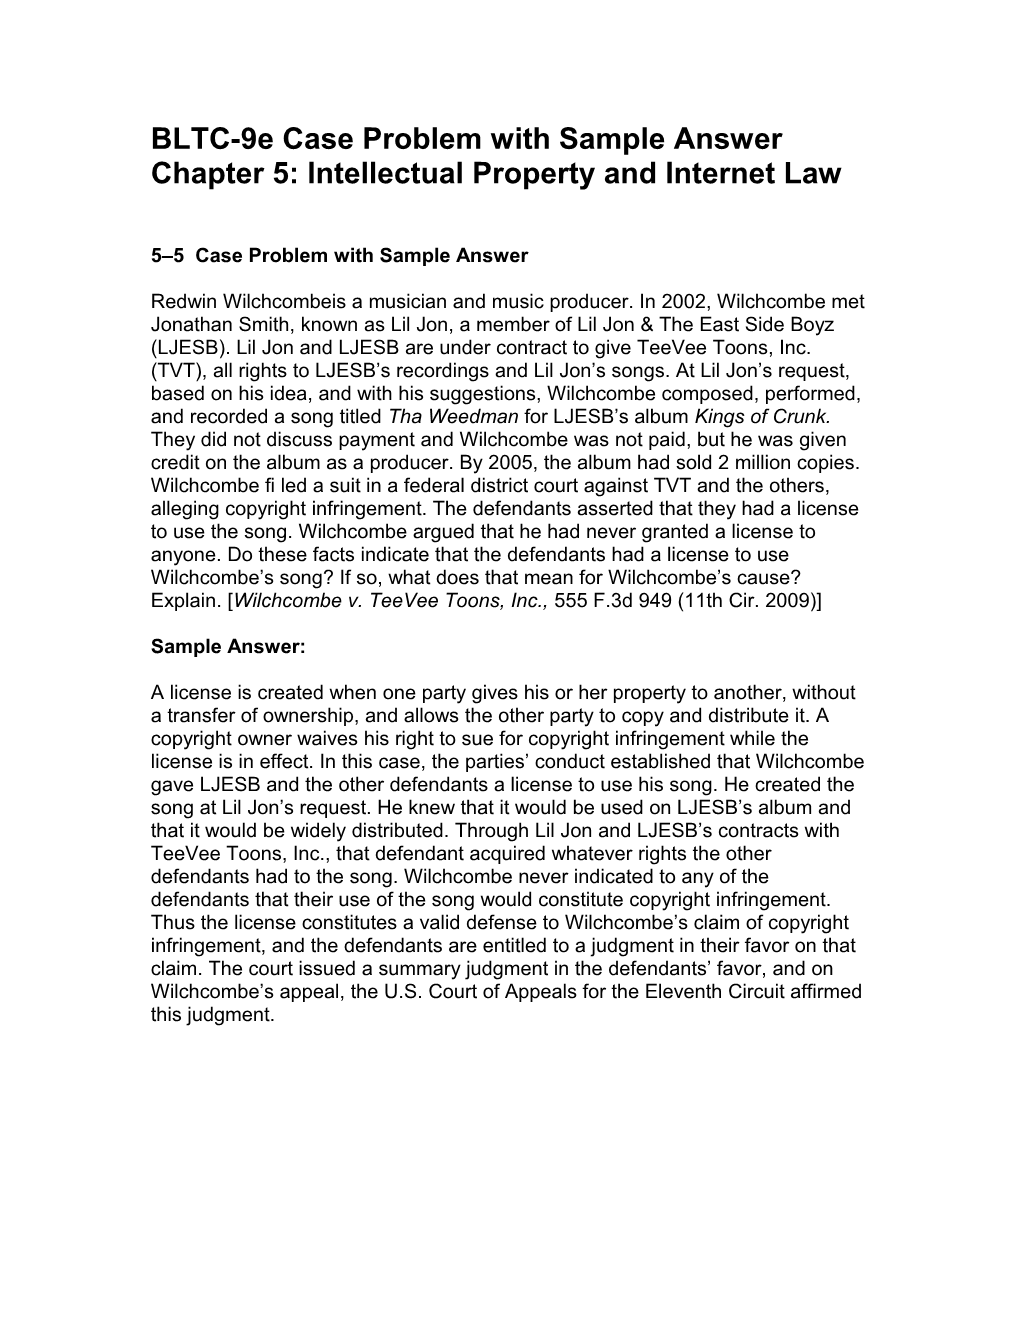 Chapter 4 - Constitutional Authority to Regulate Business s2